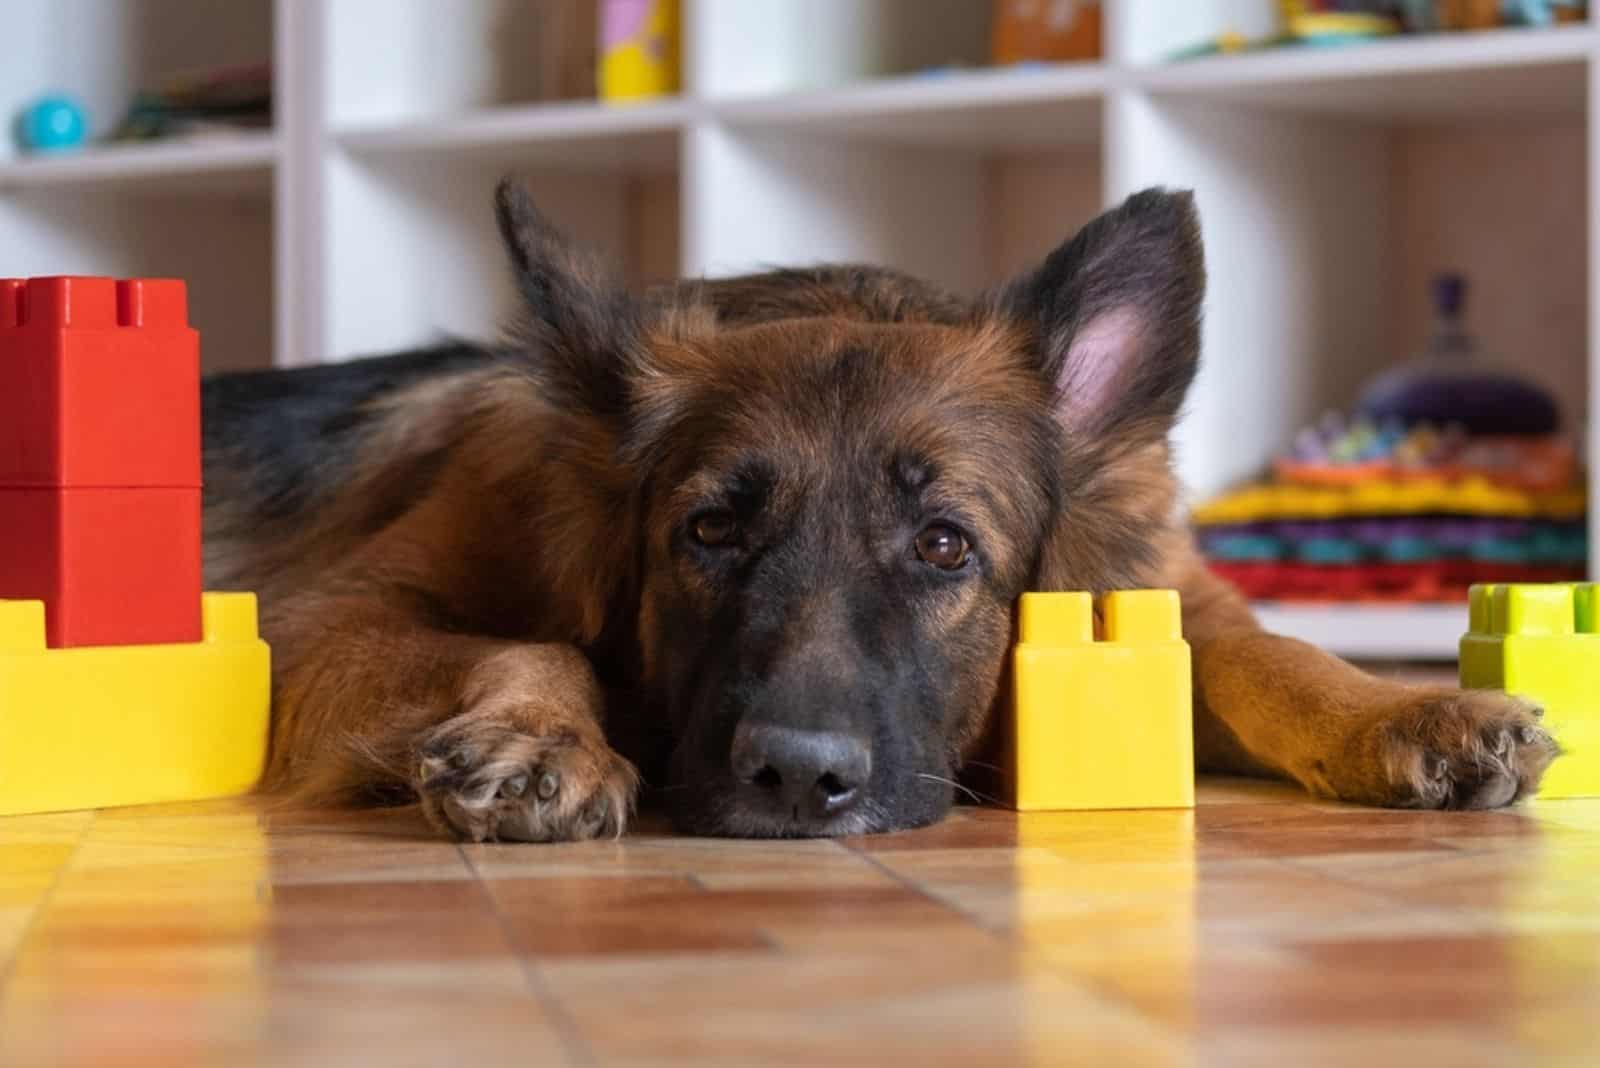 The German shepherd dog lies with children's toys